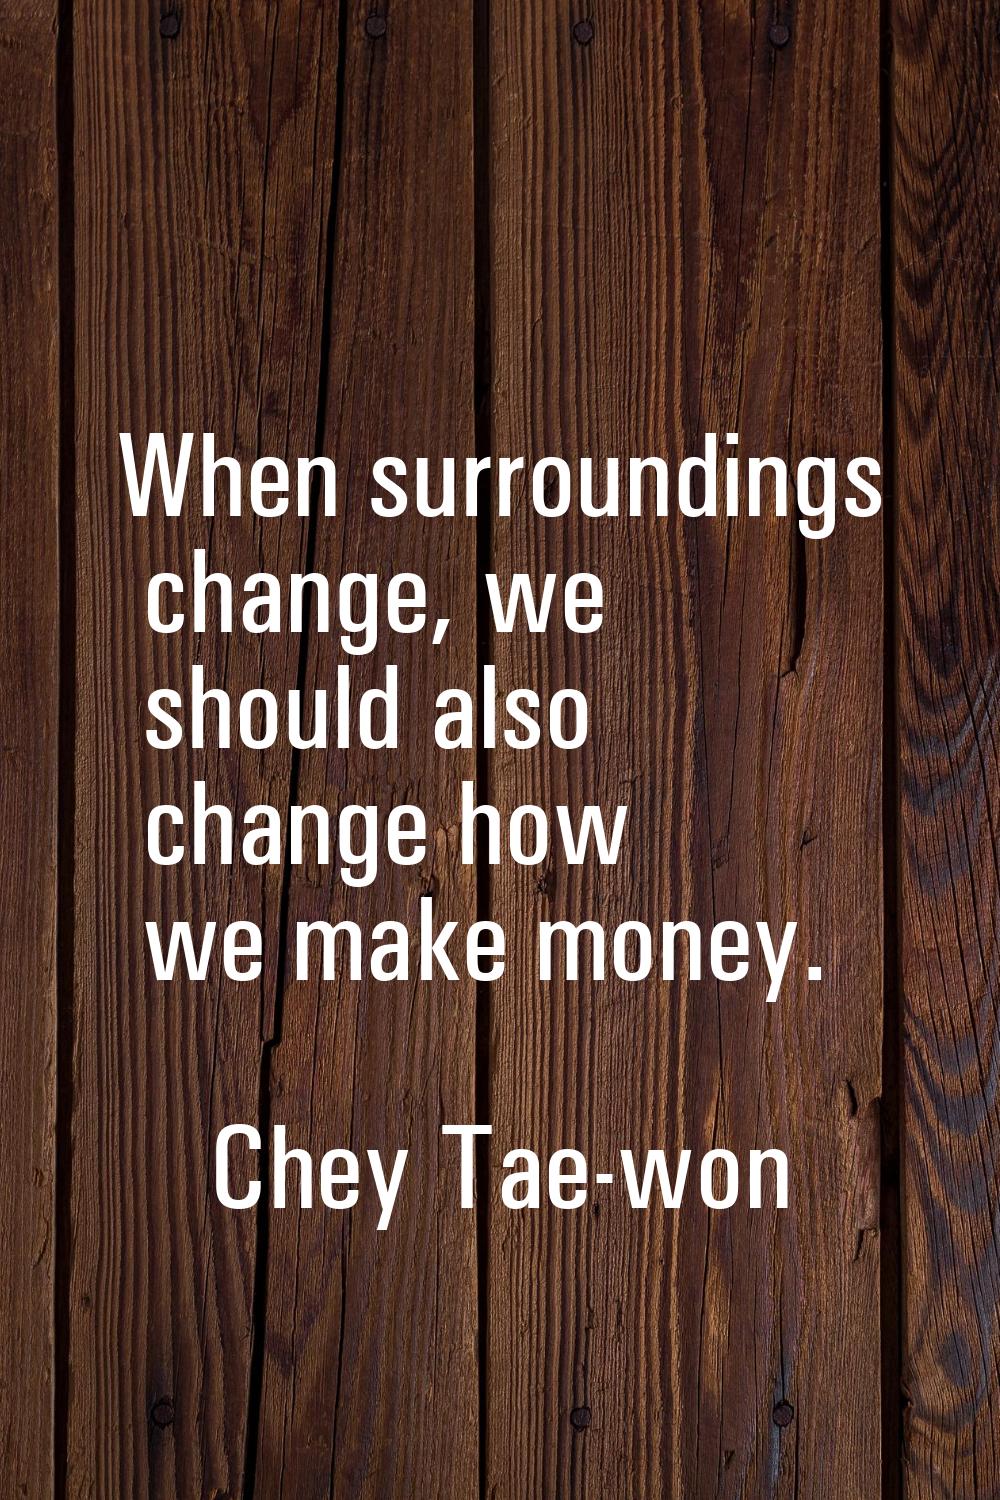 When surroundings change, we should also change how we make money.